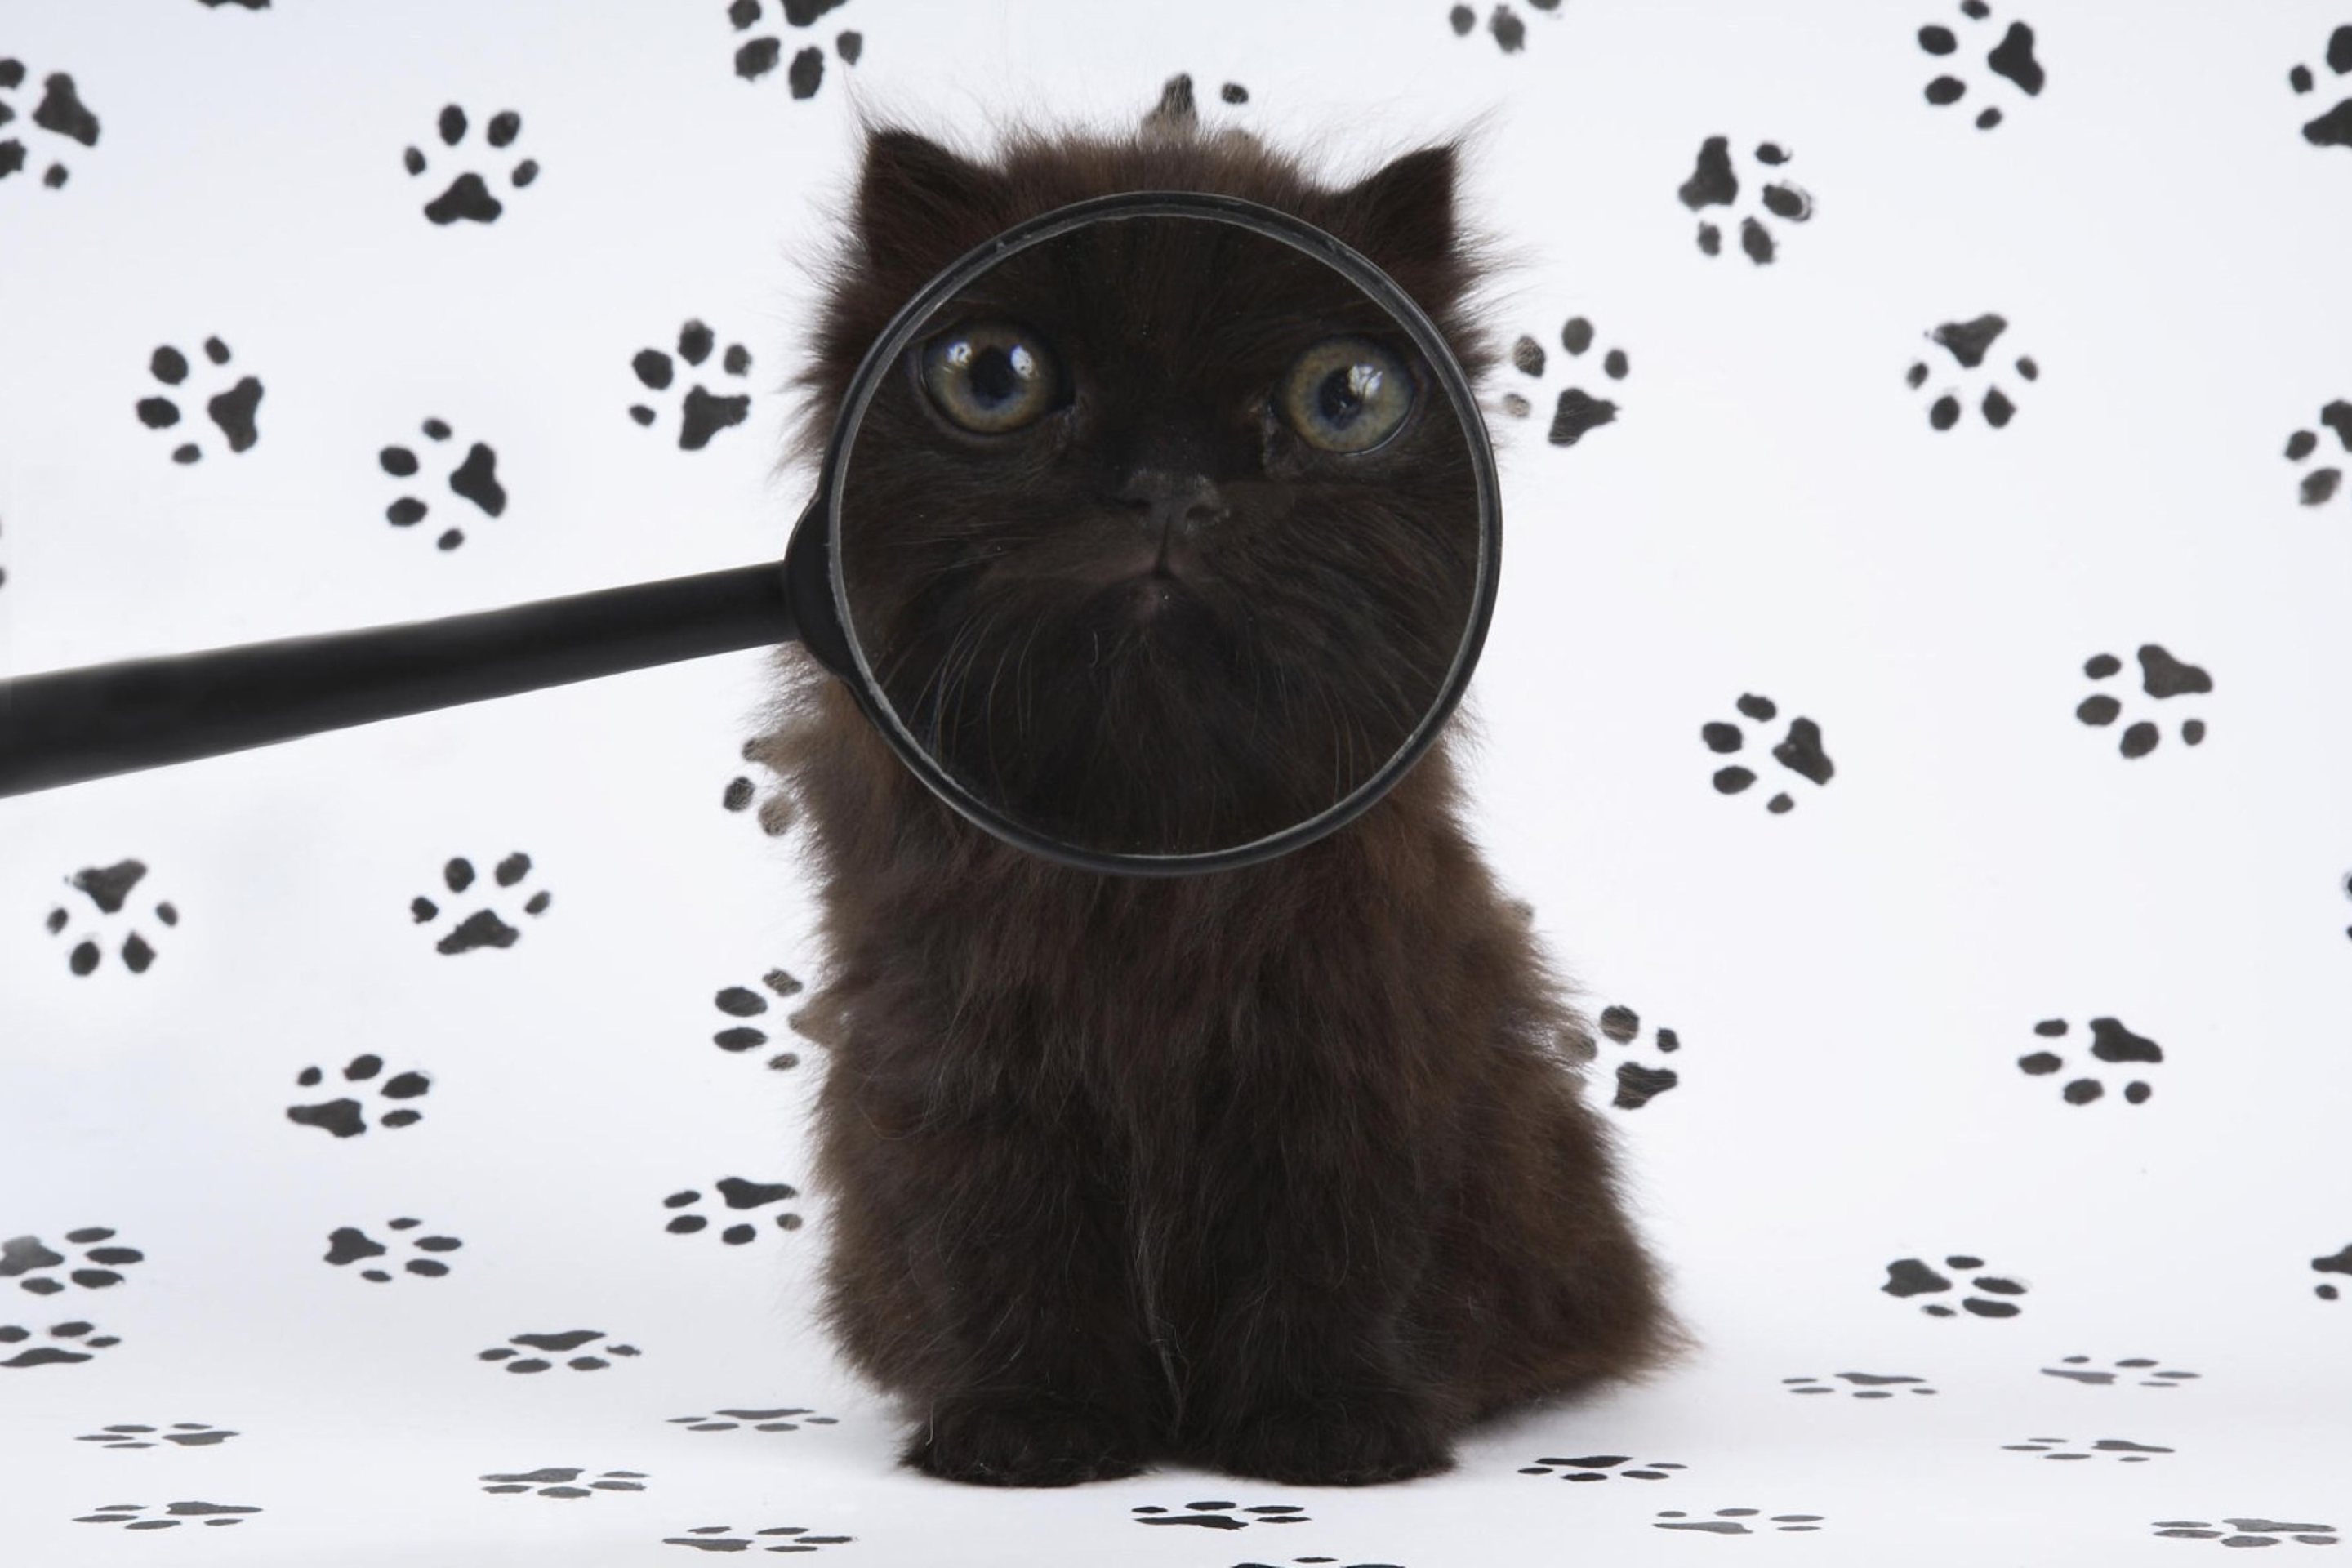 Cat And Magnifying Glass wallpaper 2880x1920